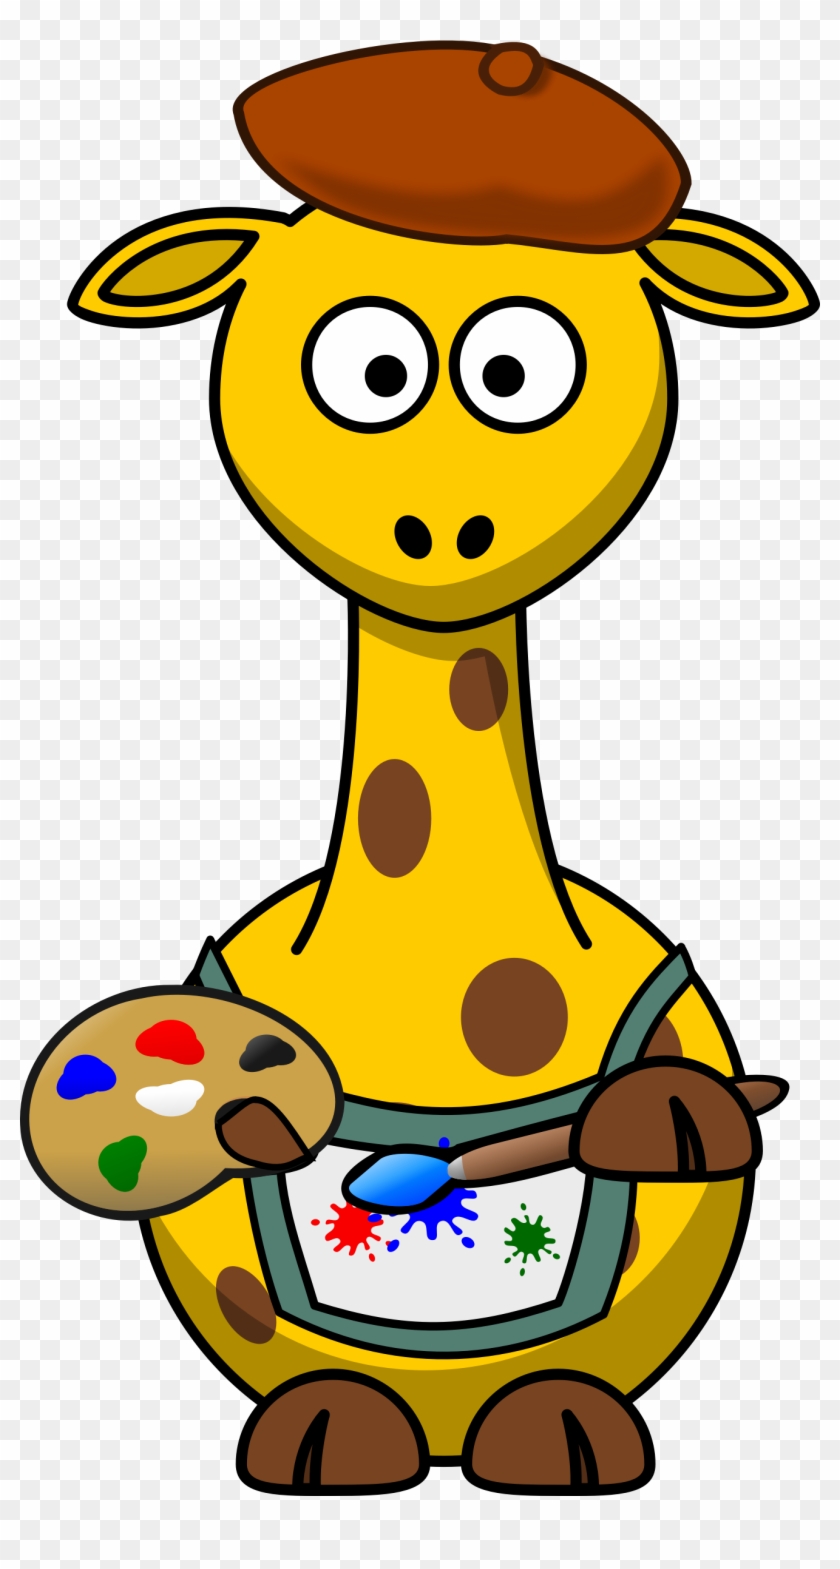 This Free Icons Png Design Of Giraffe Painter Clipart #1012459